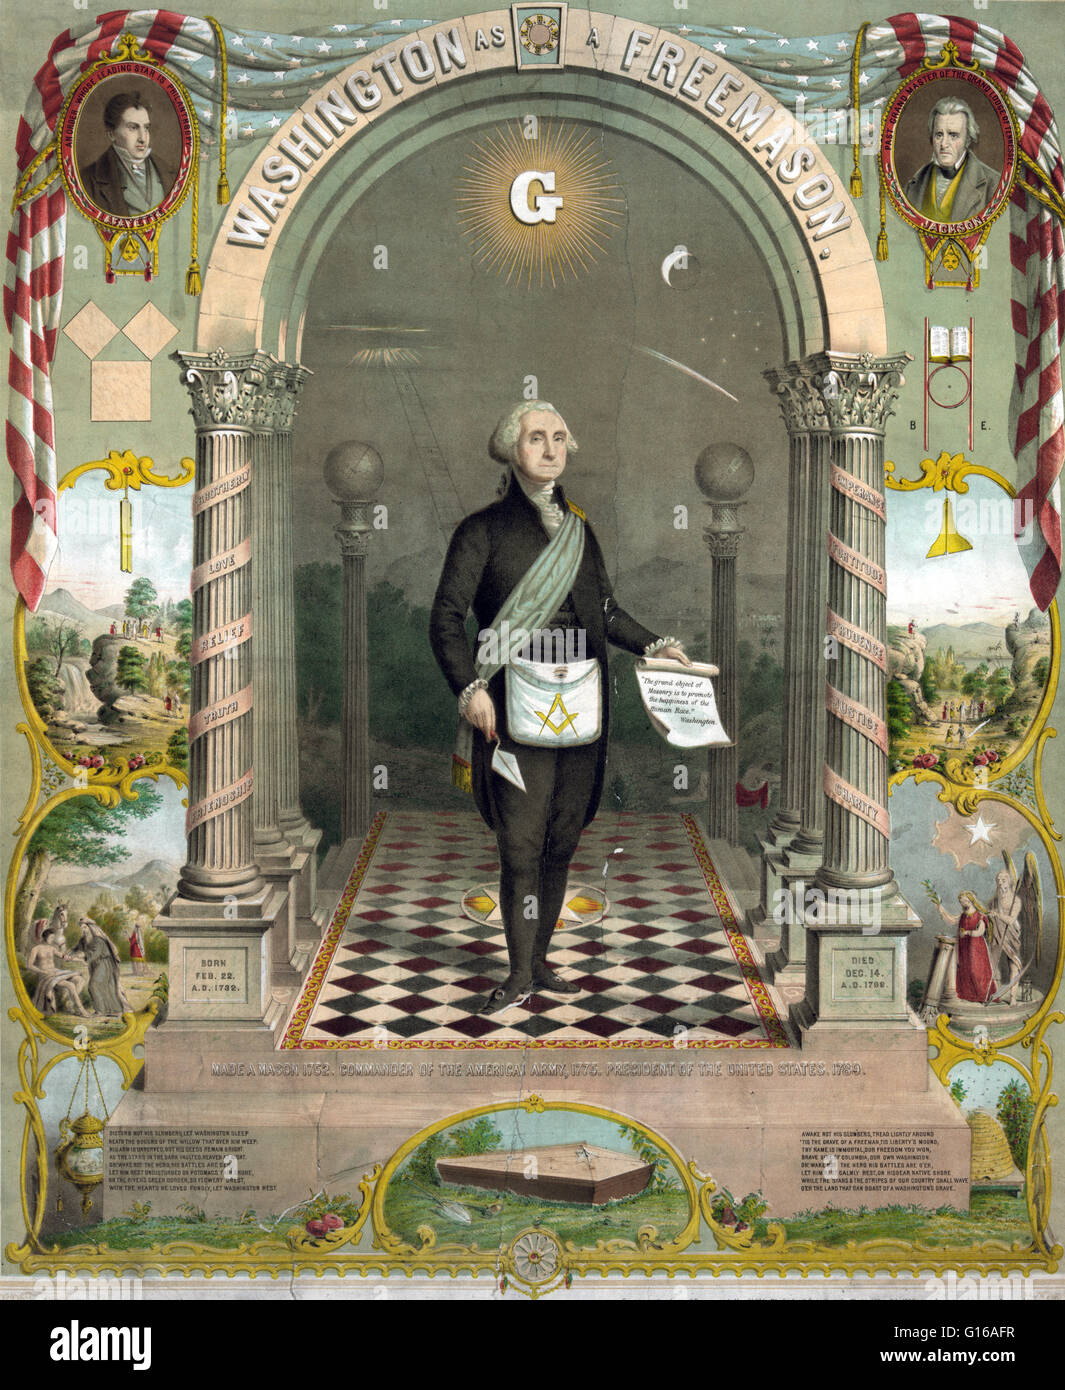 Washington in masonic attire, holding scroll, and trowel. Portraits of Lafayette and Jackson in corners. He joined the Masonic Lodge in Fredericksburg, Virginia at the age of 20 in 1752. At his first inauguration in 1791, President Washington took his oat Stock Photo